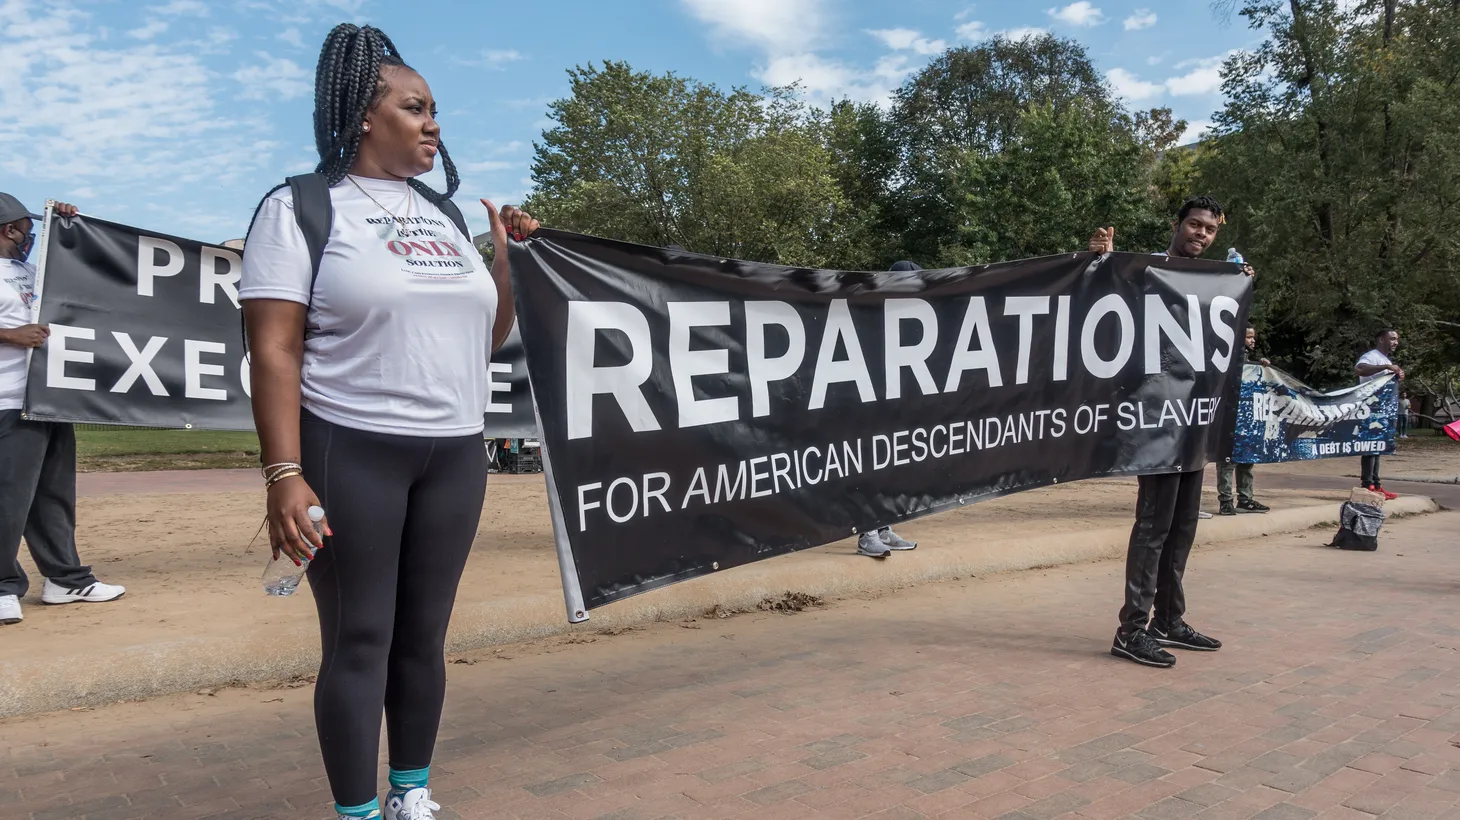 Activists hold a banner that says, “Reparations for American descendants of slavery.”